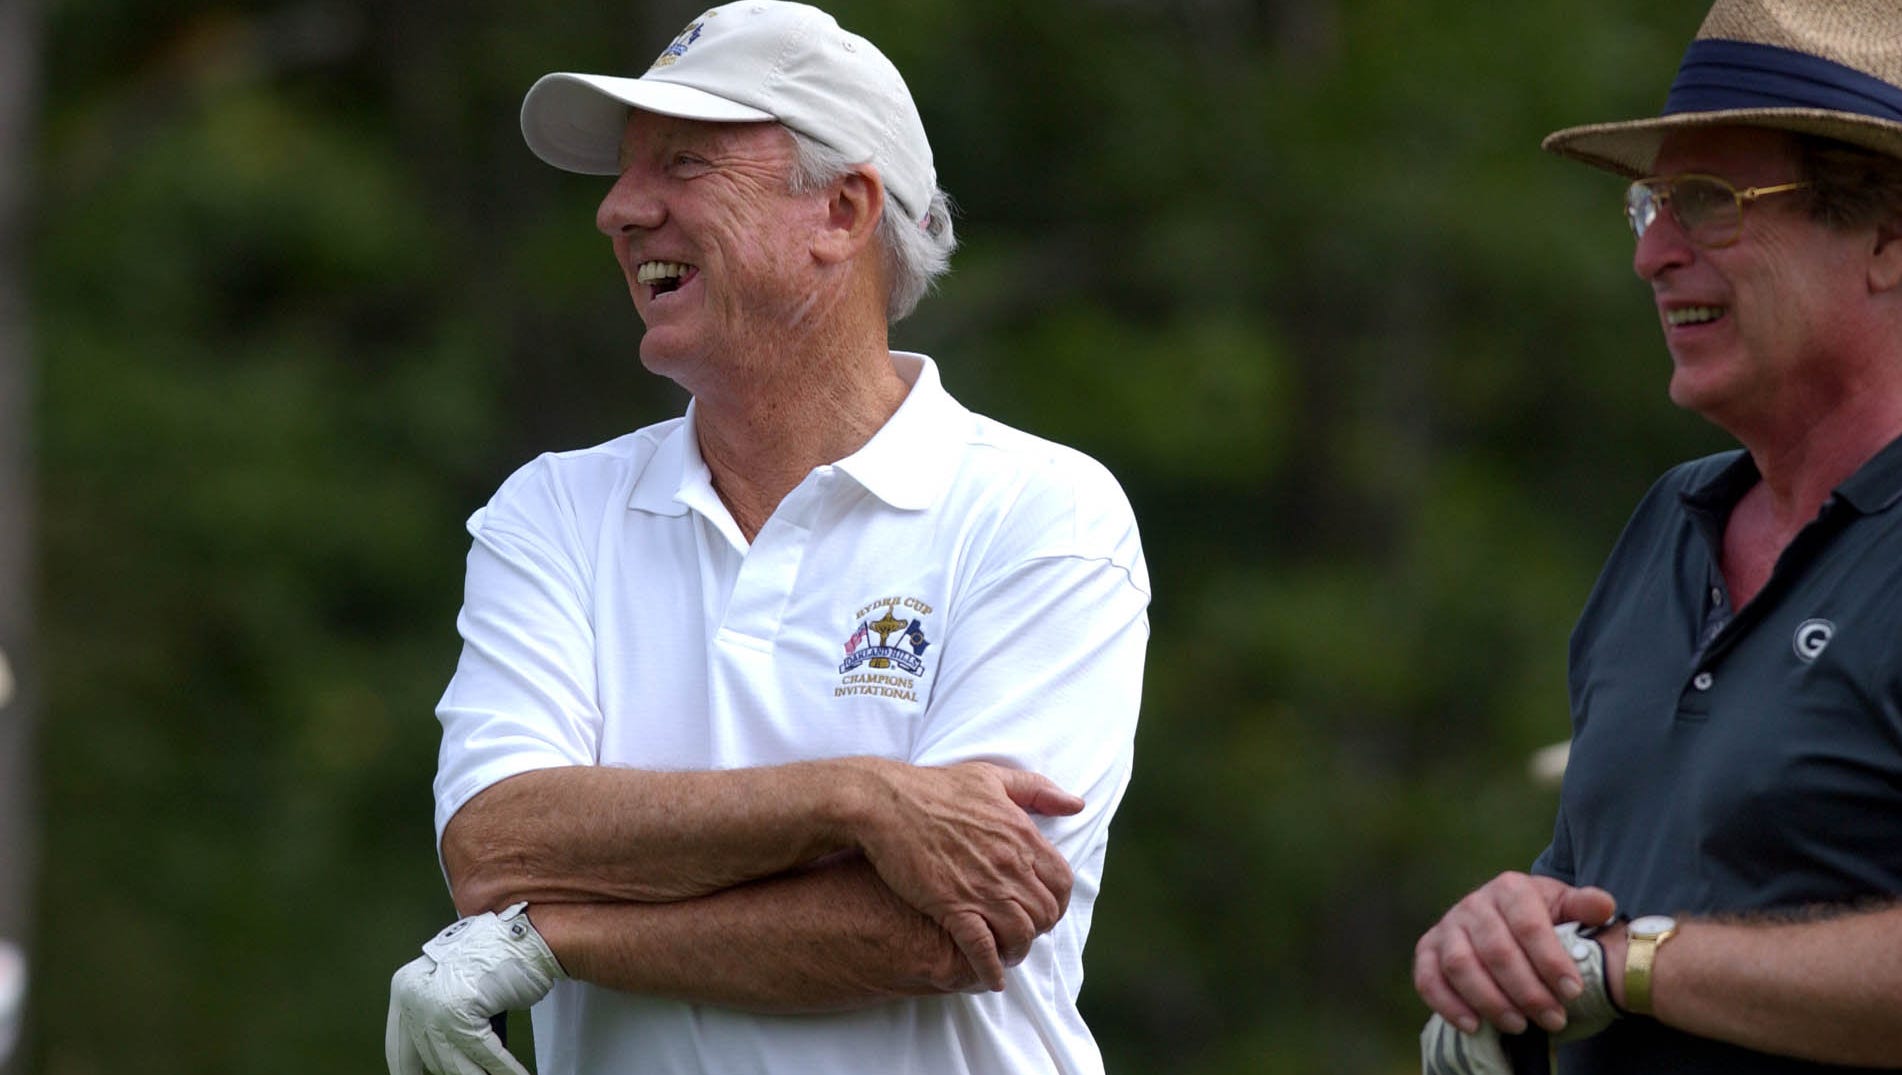 Mr. Tiger Al Kaline, a longtime Oakland Hills member, has a laugh during a round prior to the 2004 Ryder Cup.